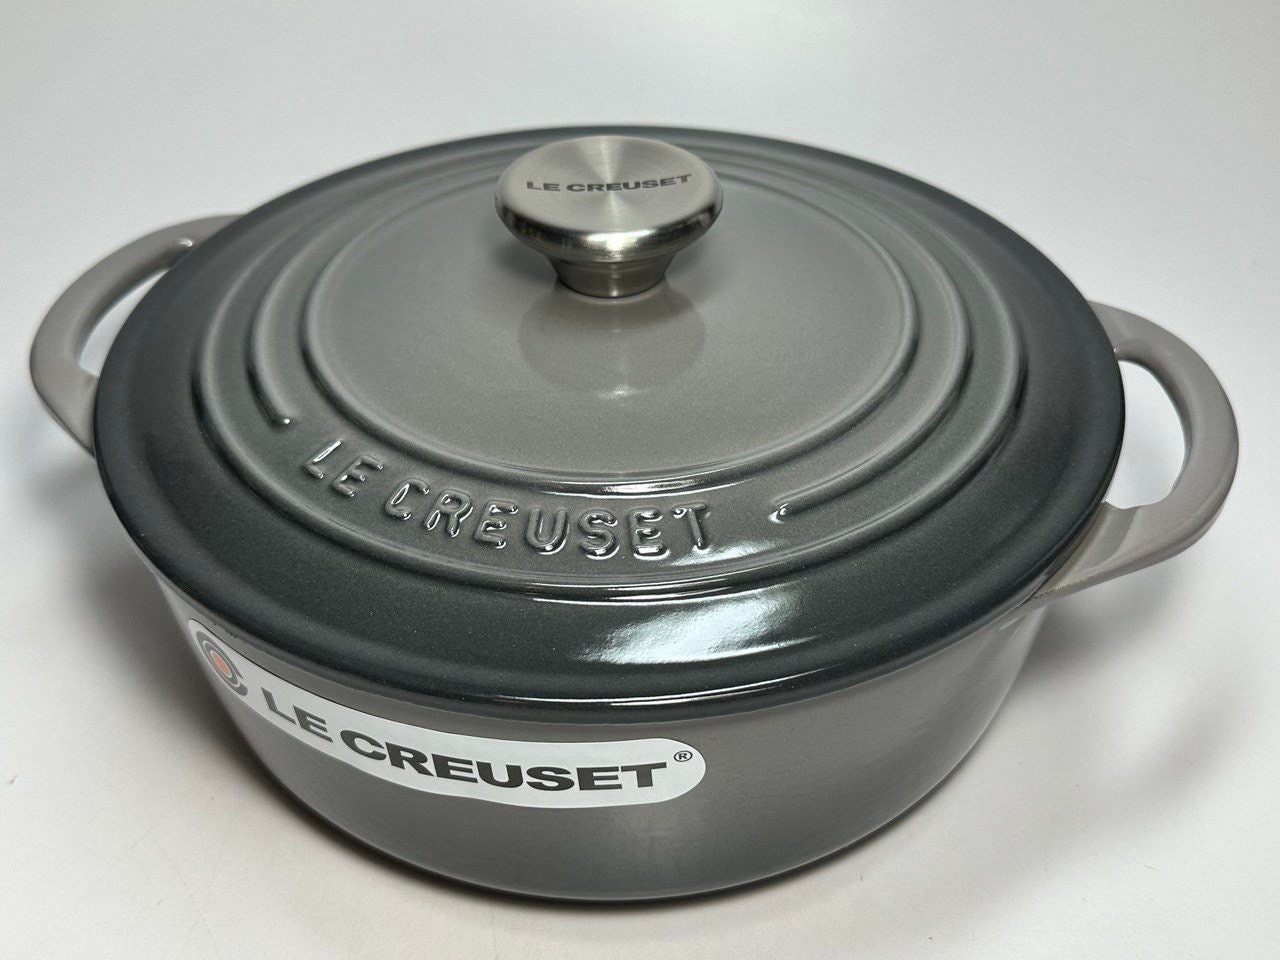 Bistro 7-Quart Oval Enameled Cast Iron Dutch Oven, Grey | at Home